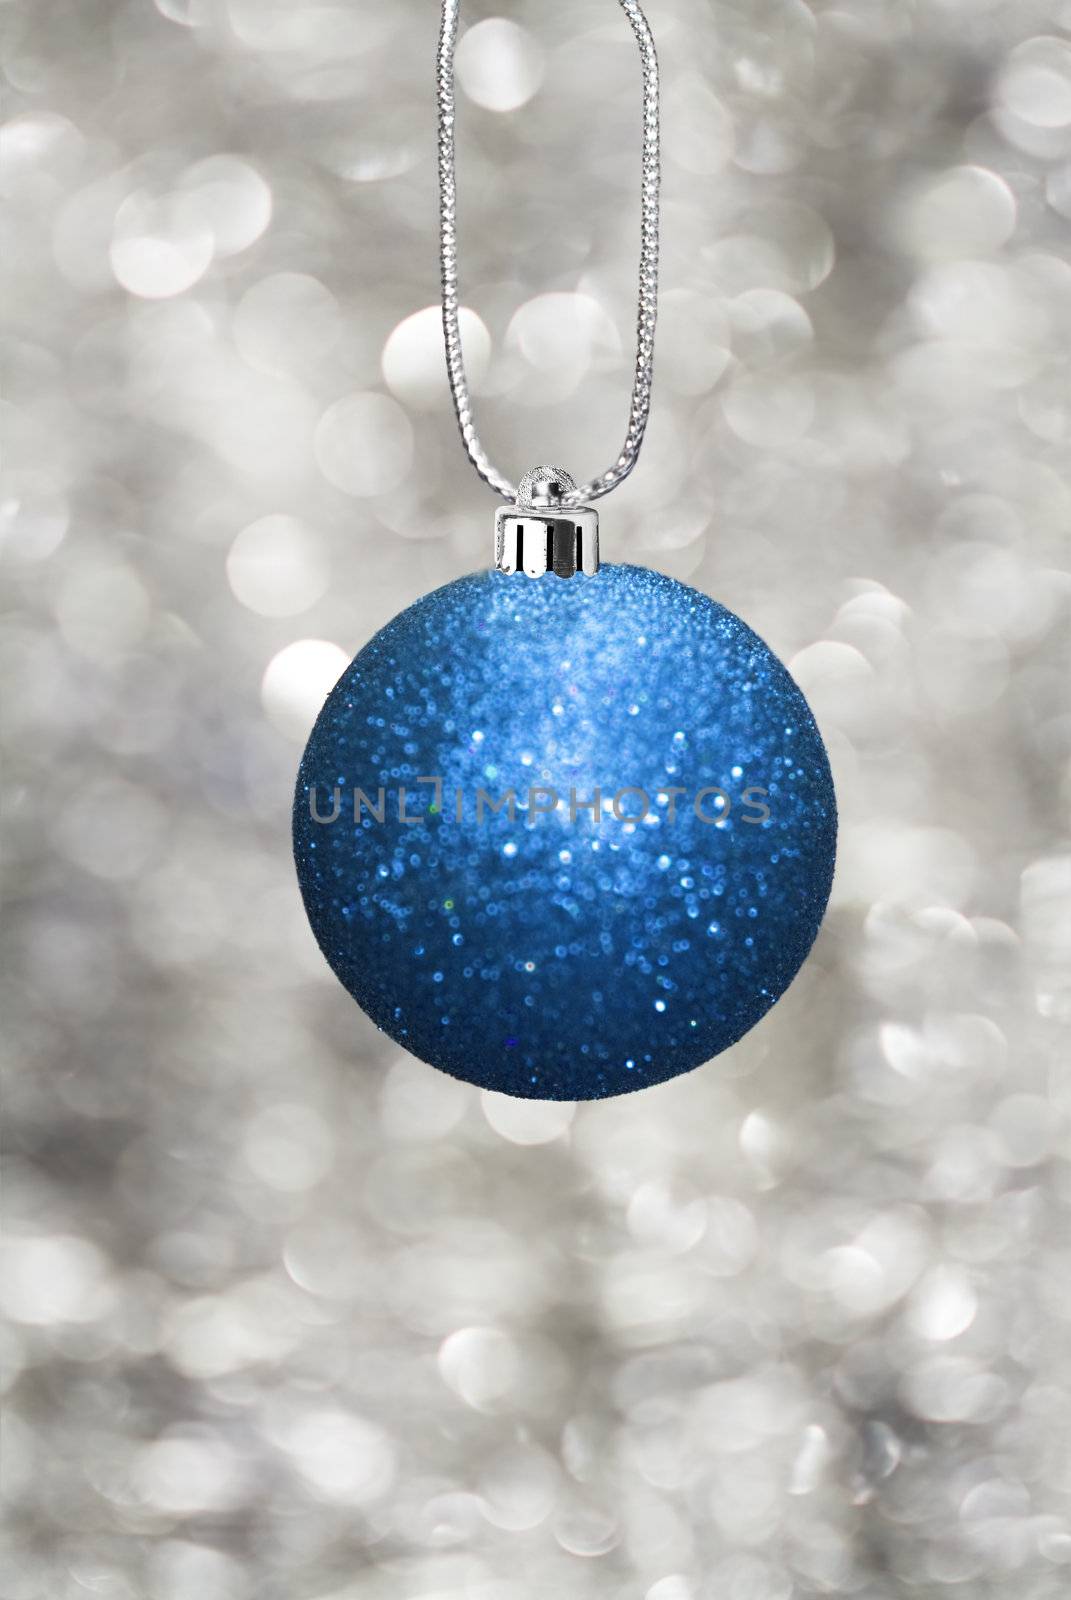 Christmas ball with sparkling background